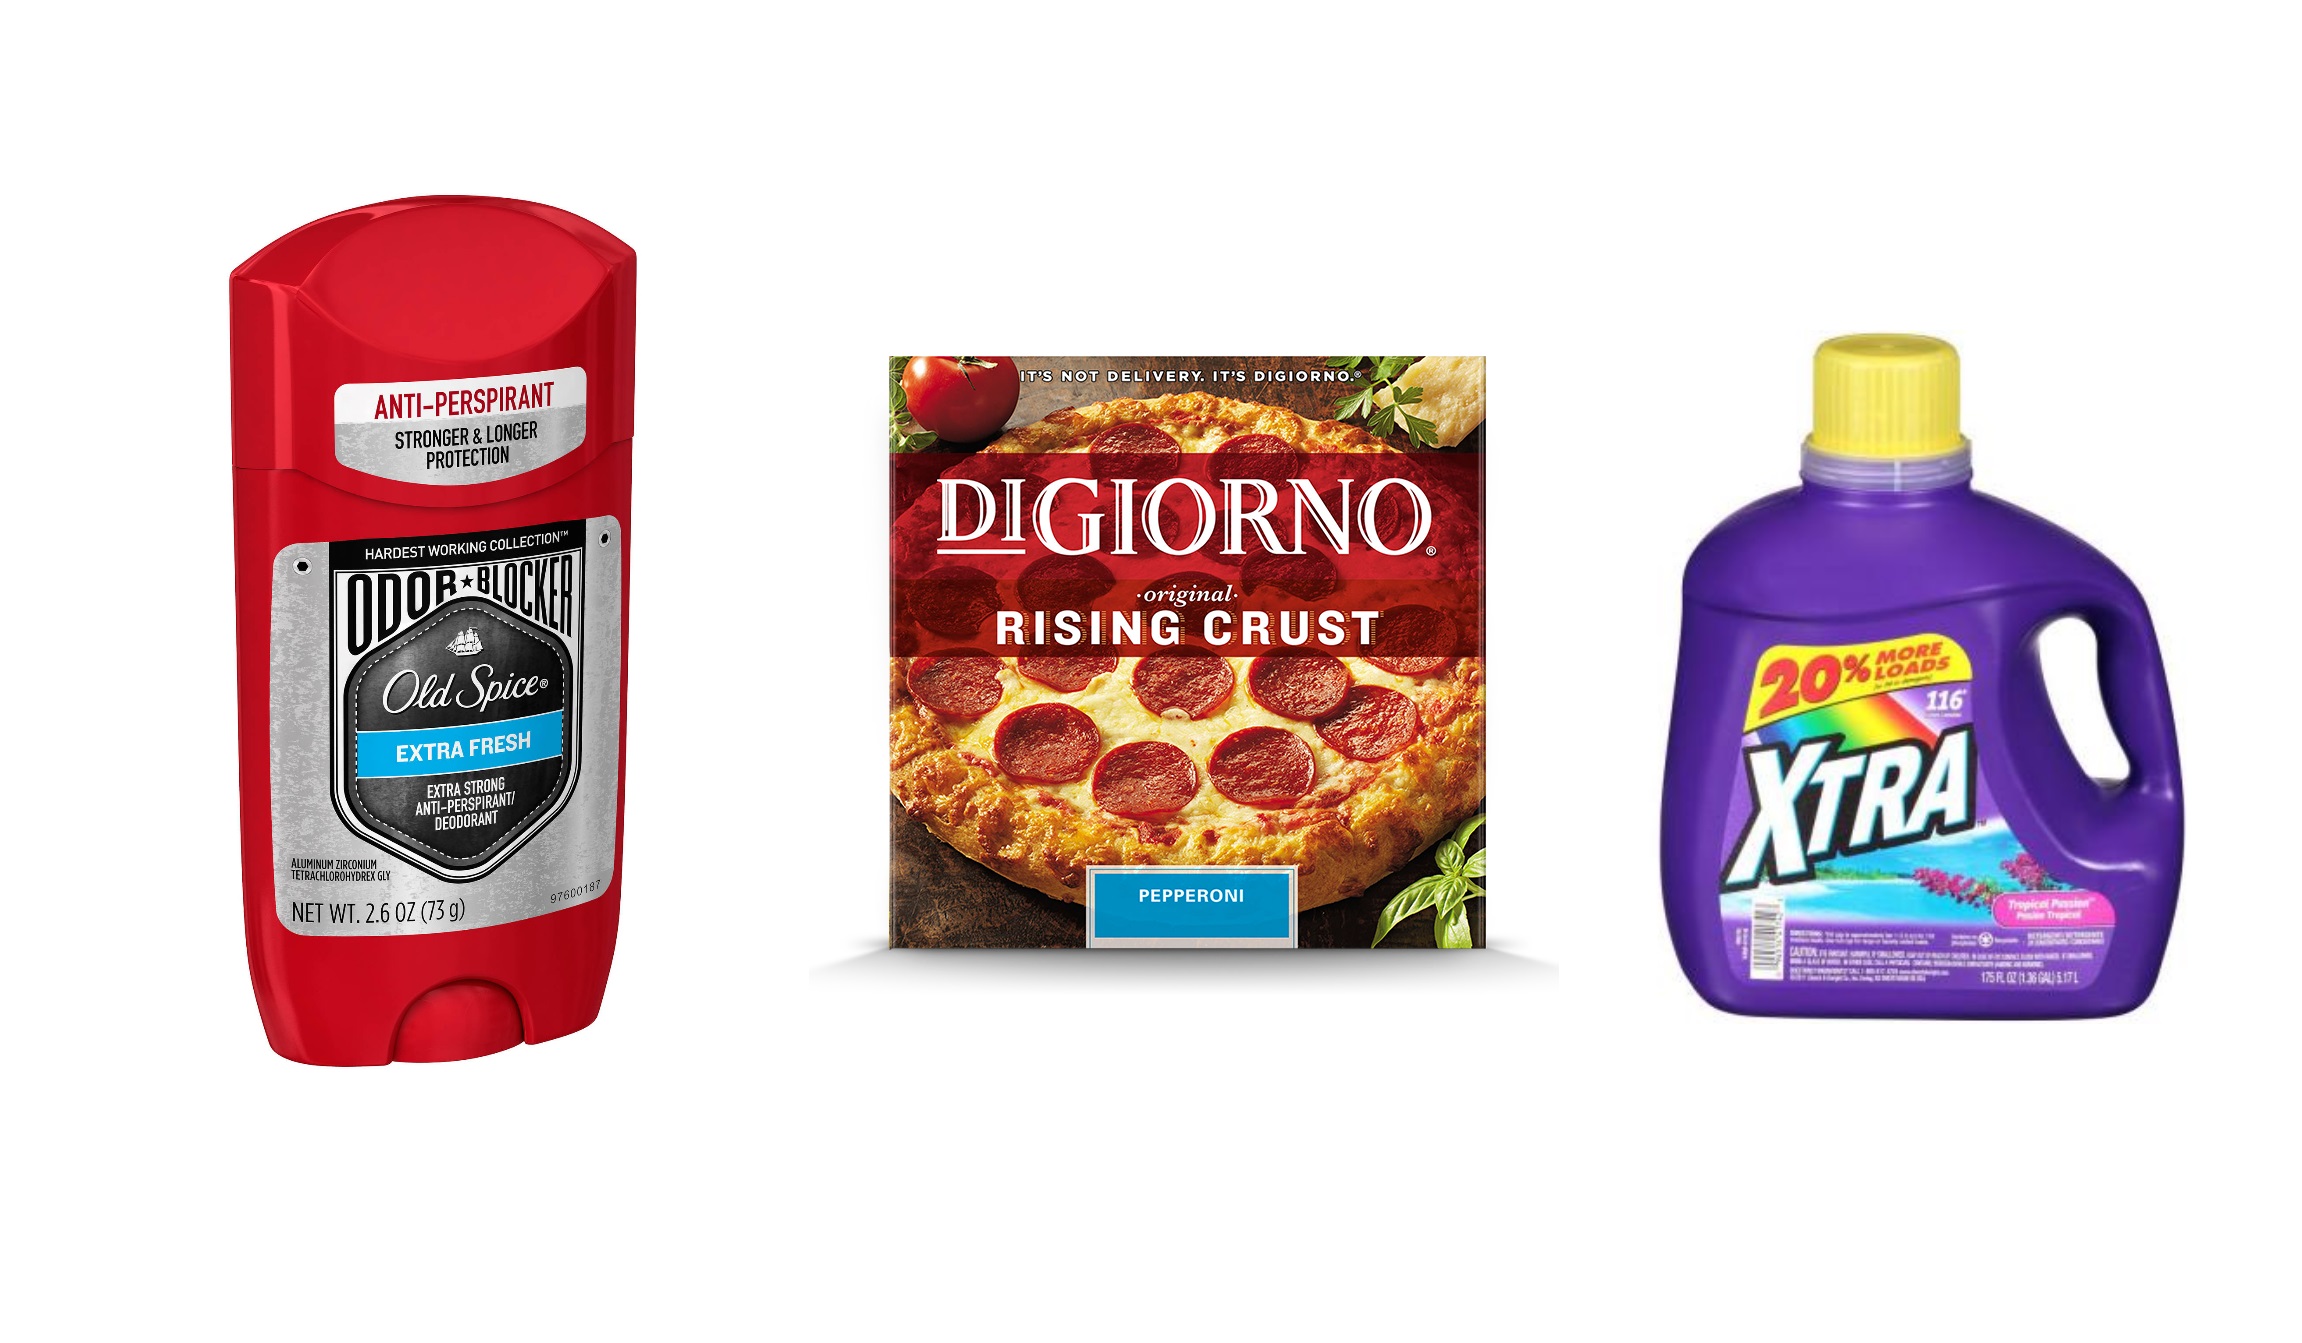 Coupons: Snuggle, All, Xtra, DiGiorno, Hormel, and Old Spice